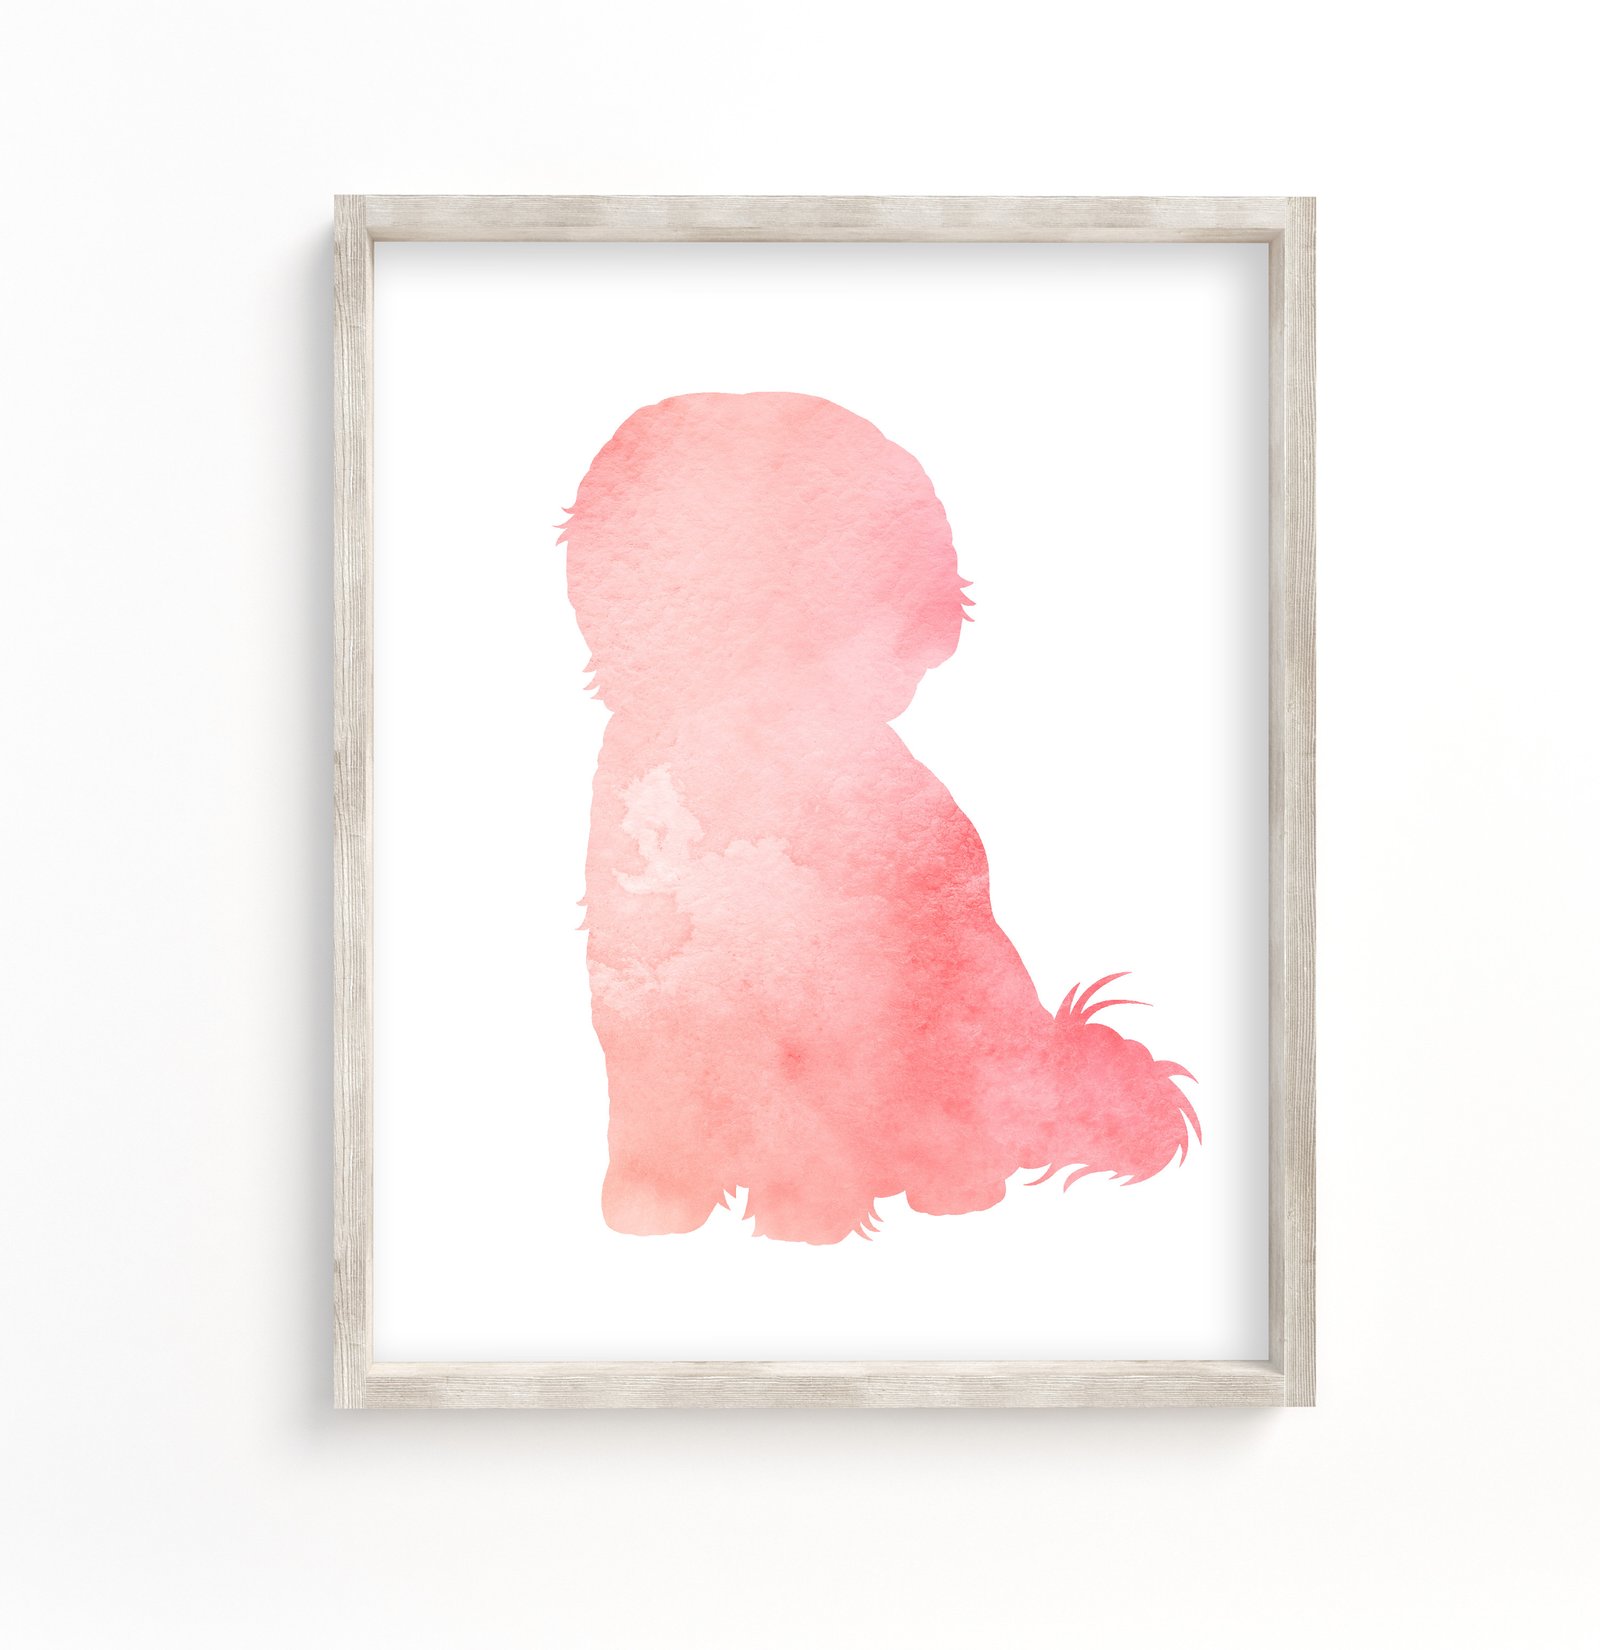 pink silhouette of a bichon frise dog made with watercolor